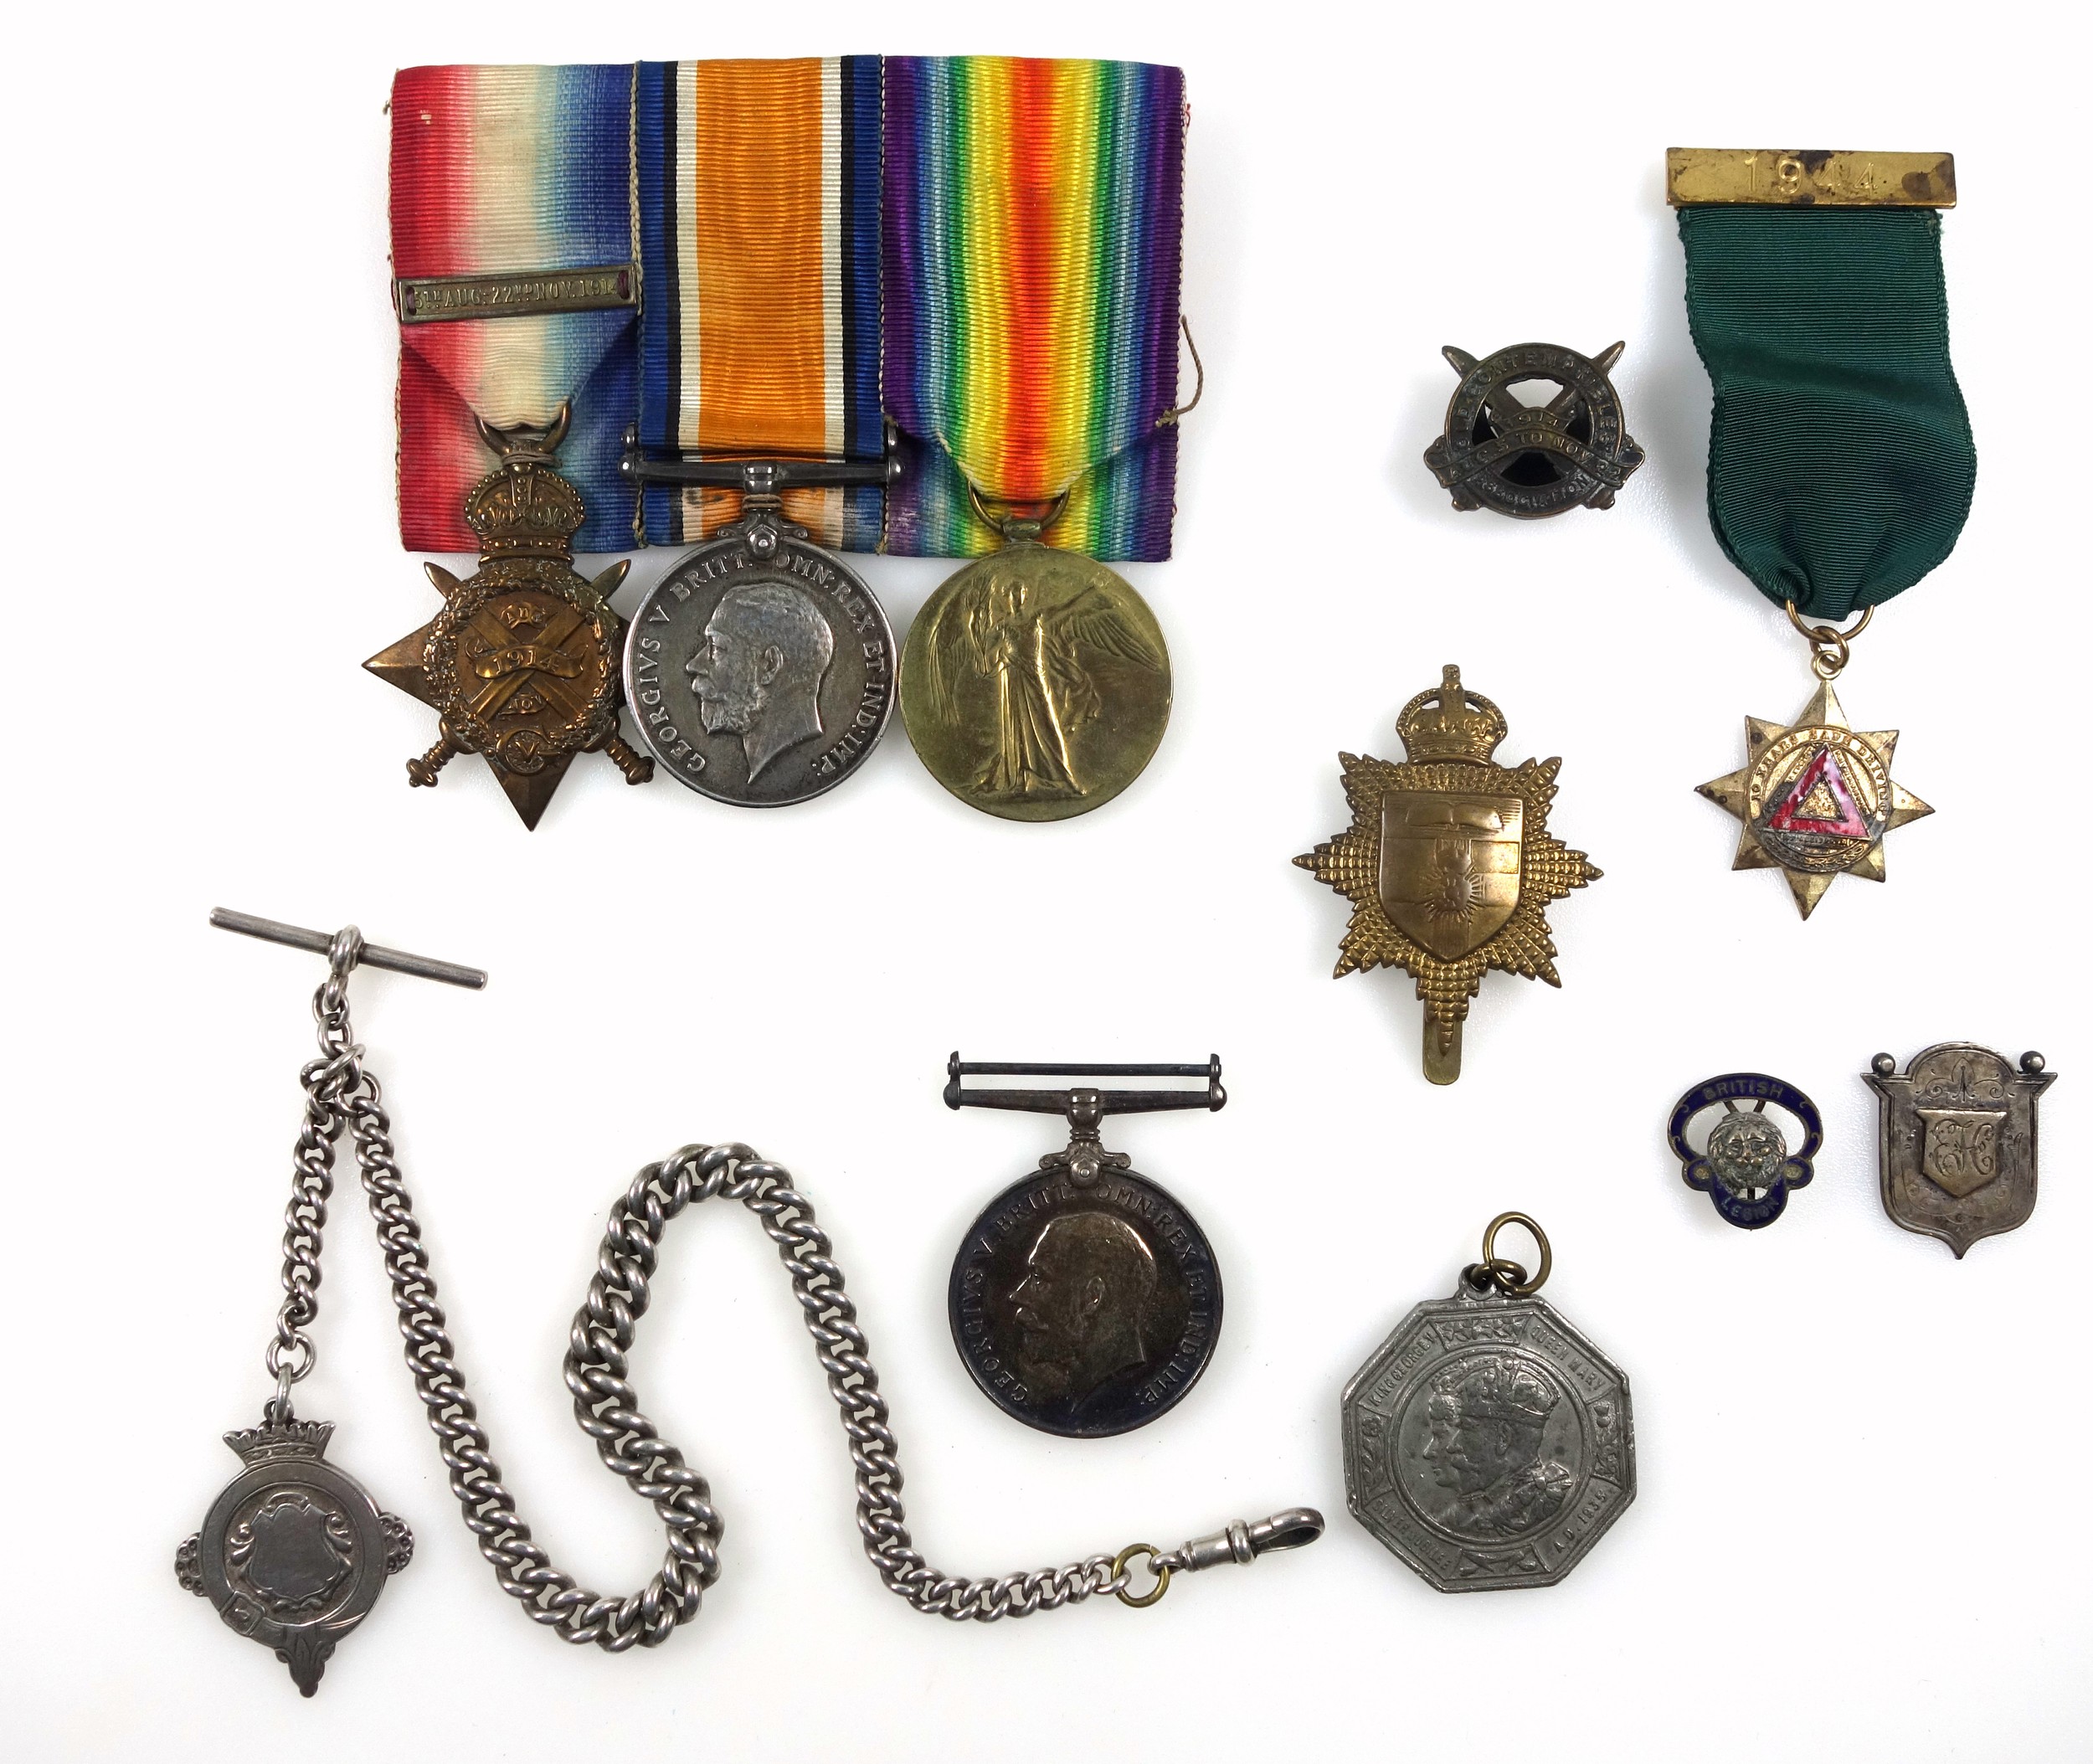 Group of 3 1st World War medals awarded to T-25498 DVR E Higgins, A.S.C., comprising the 1914 "Mons"